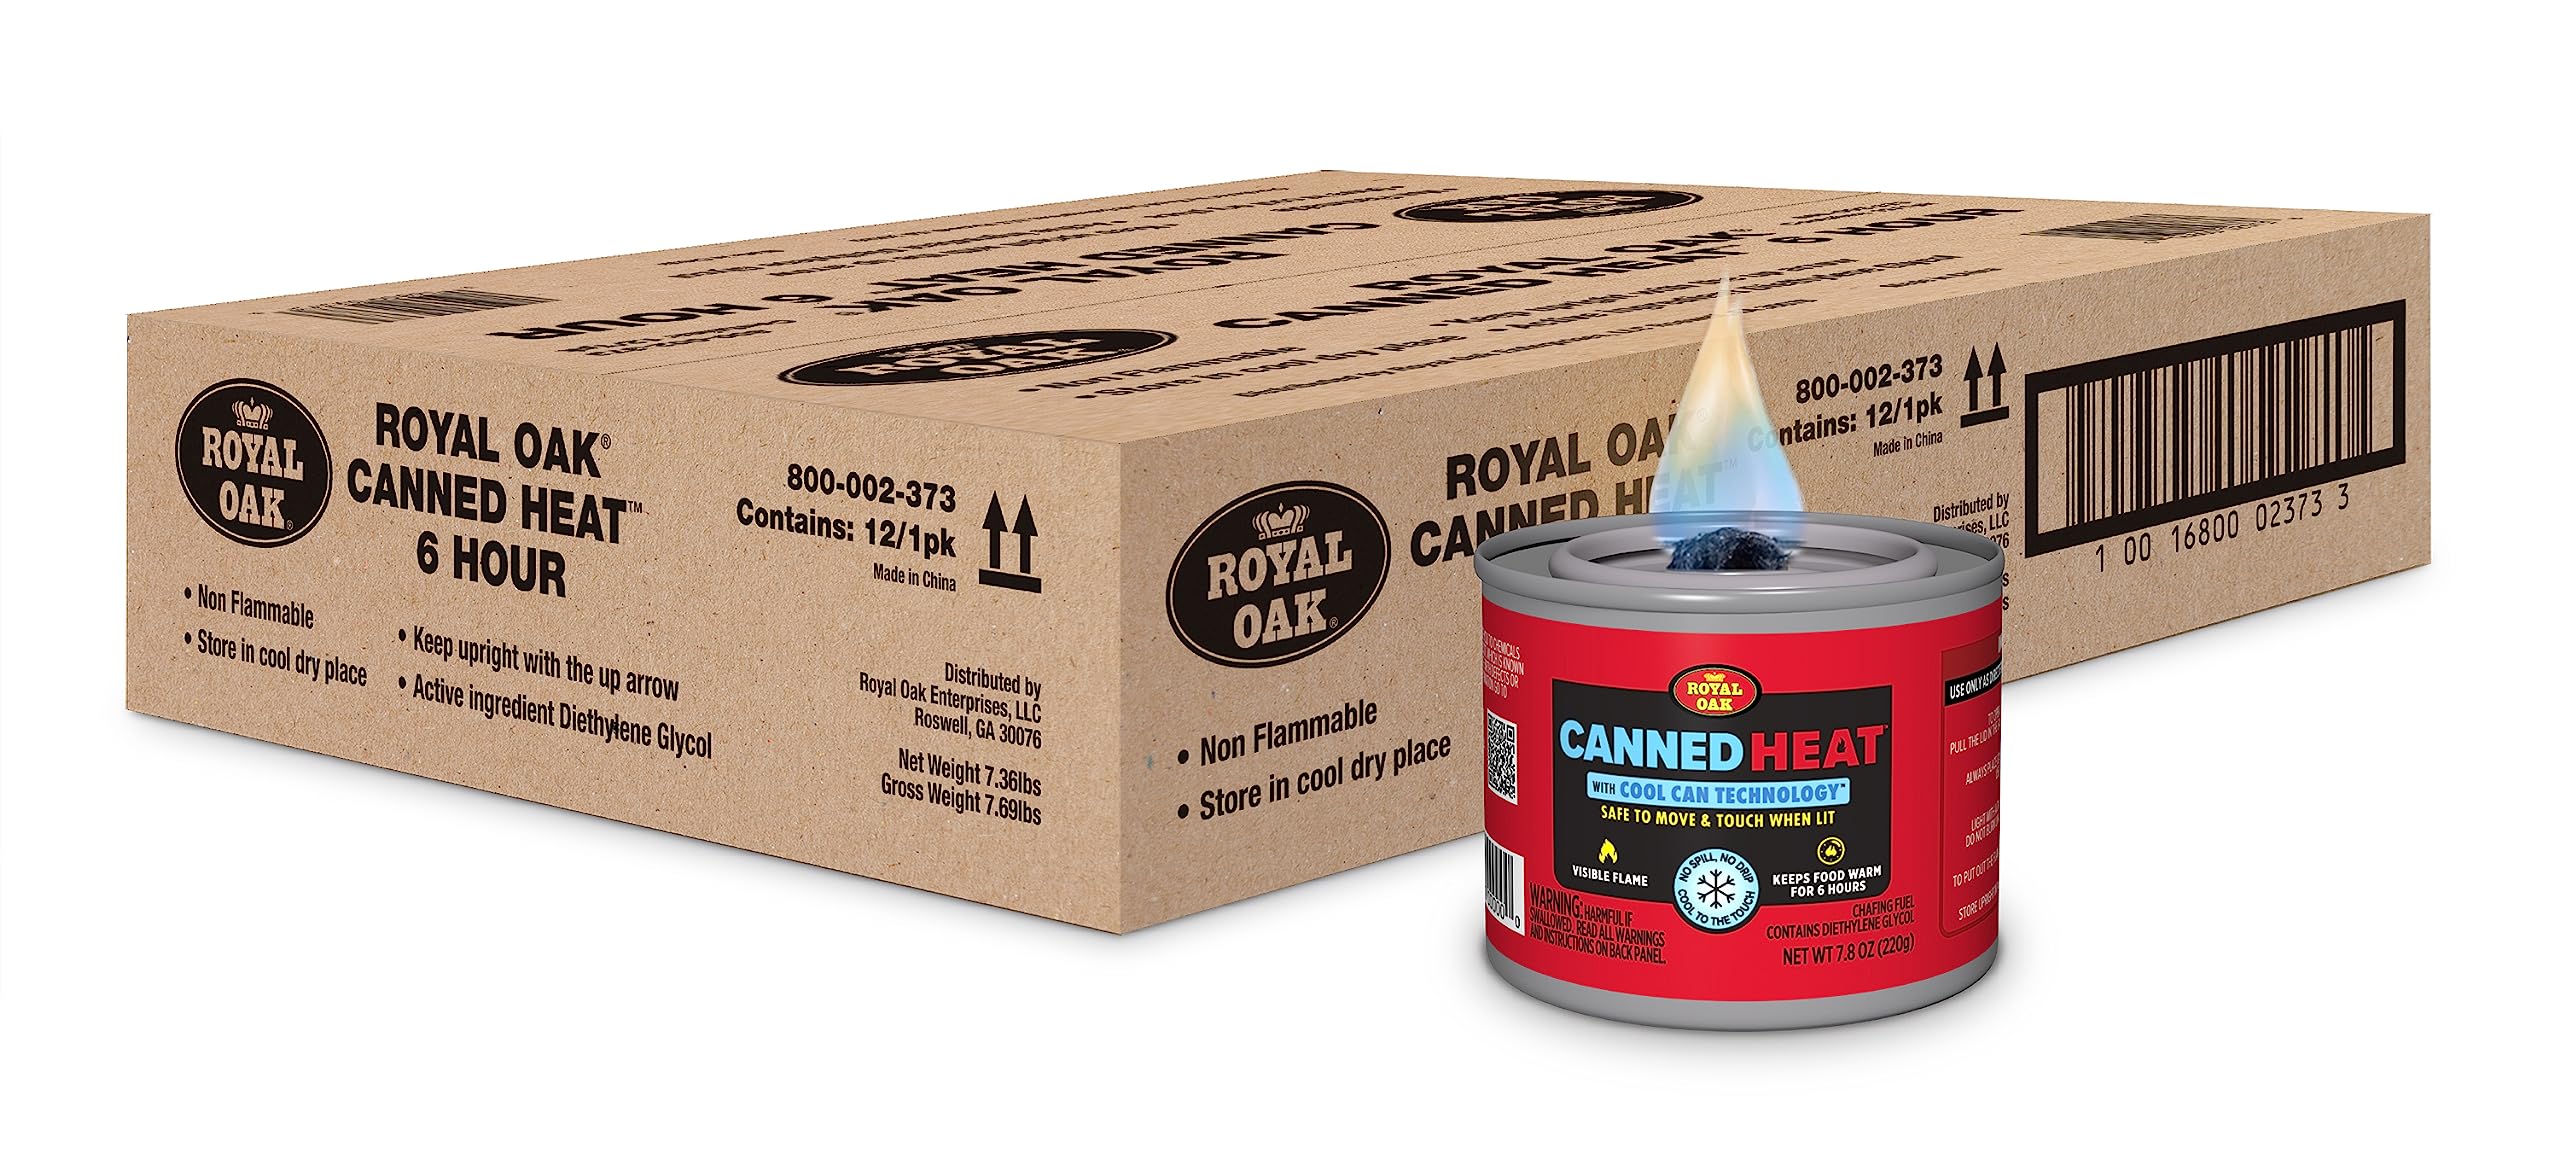 Royal Oak Canned Heat 12 Pack 6 Hour Fuel, Easy Open, Resealable, Non-Drip, for Food, Chafing Dishes, Buffet Burners, Parties, Weddings, BBQs, Small, Red